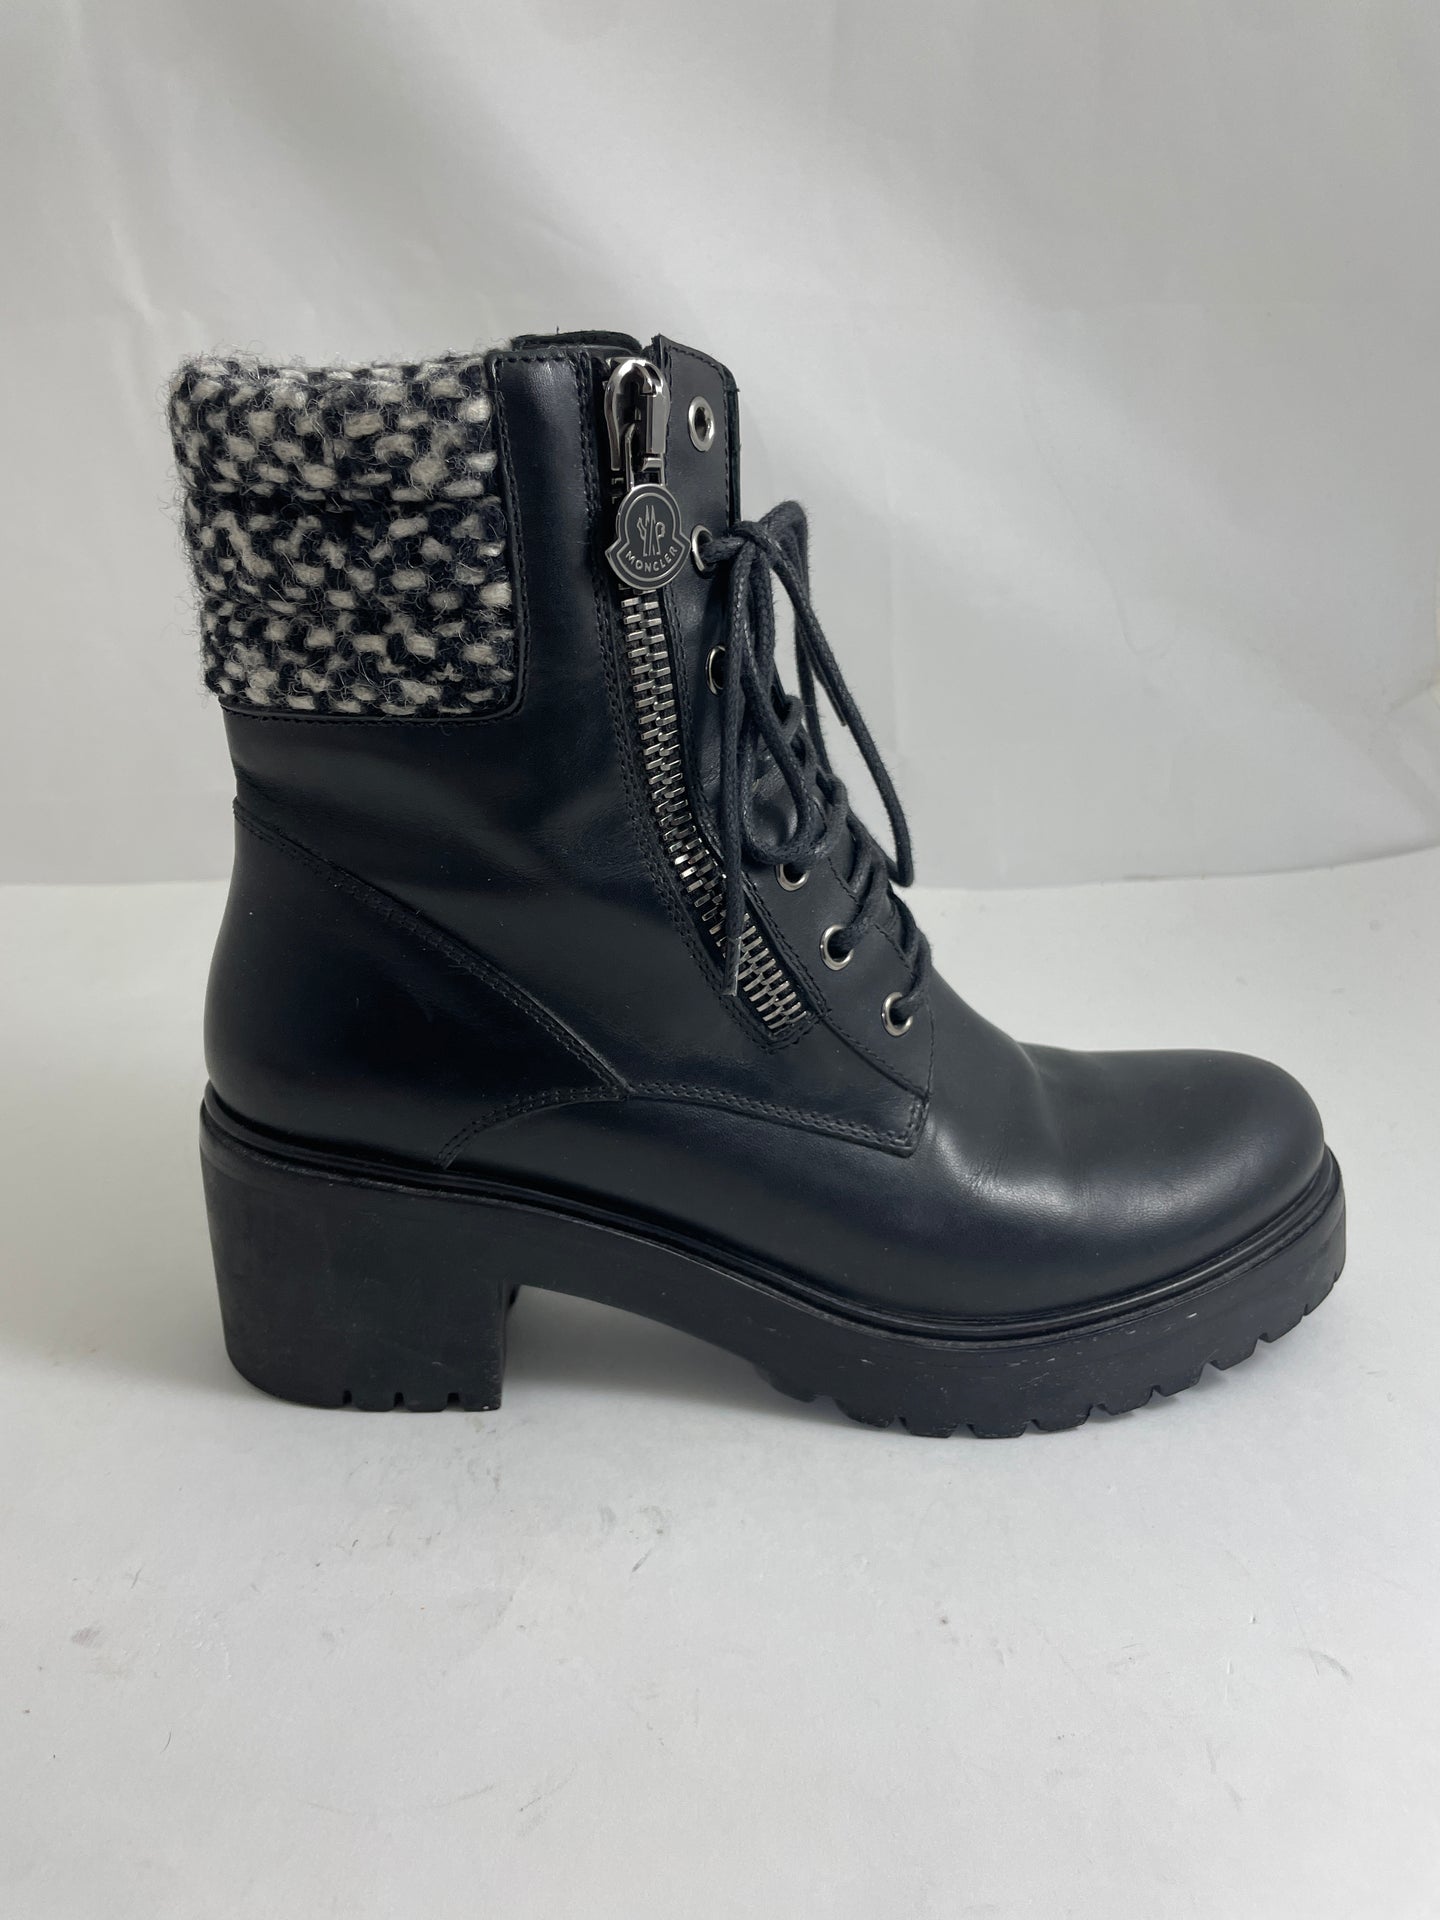 Moncler Viviane Black Leather Military Combat Boots Wool Cuff